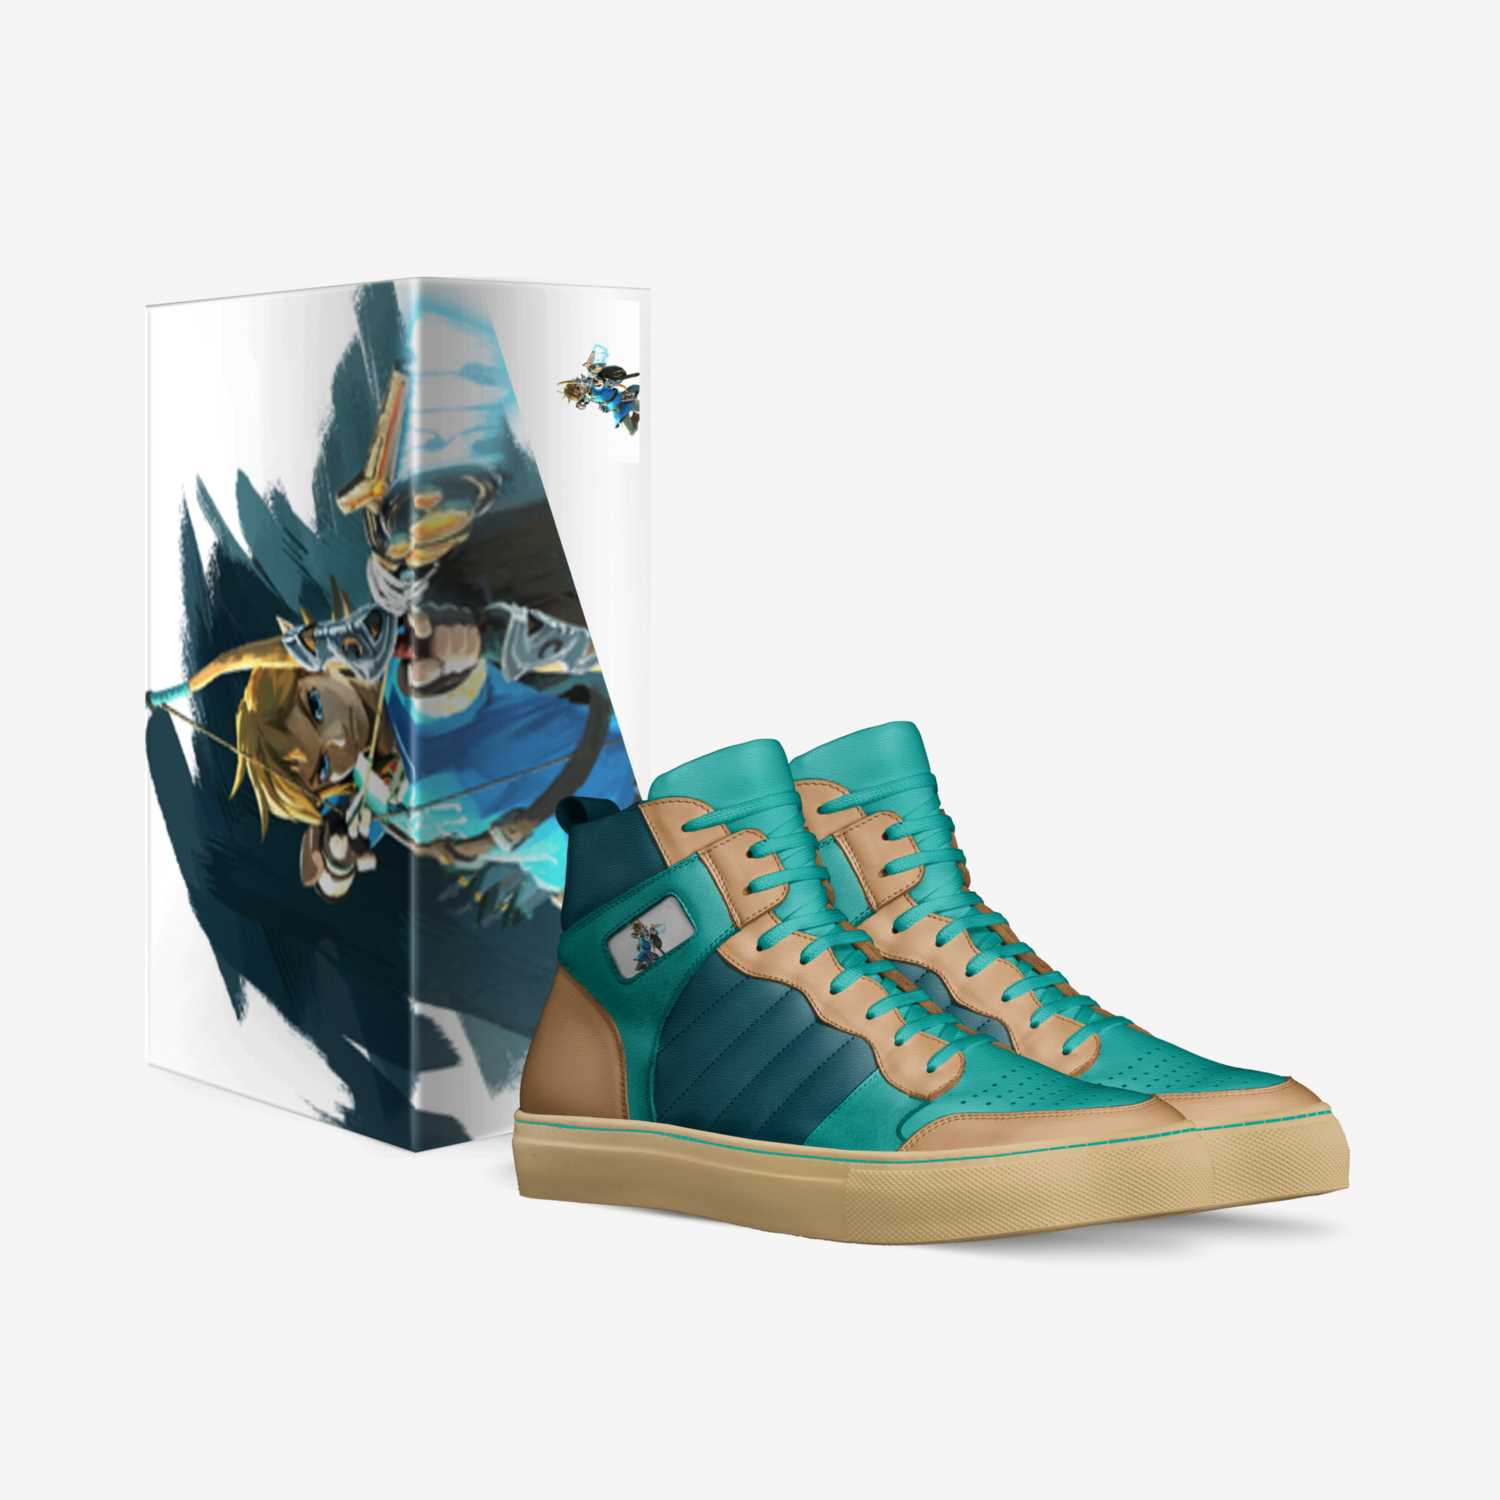 BreathOfTheWild custom made in Italy shoes by Ethan | Box view